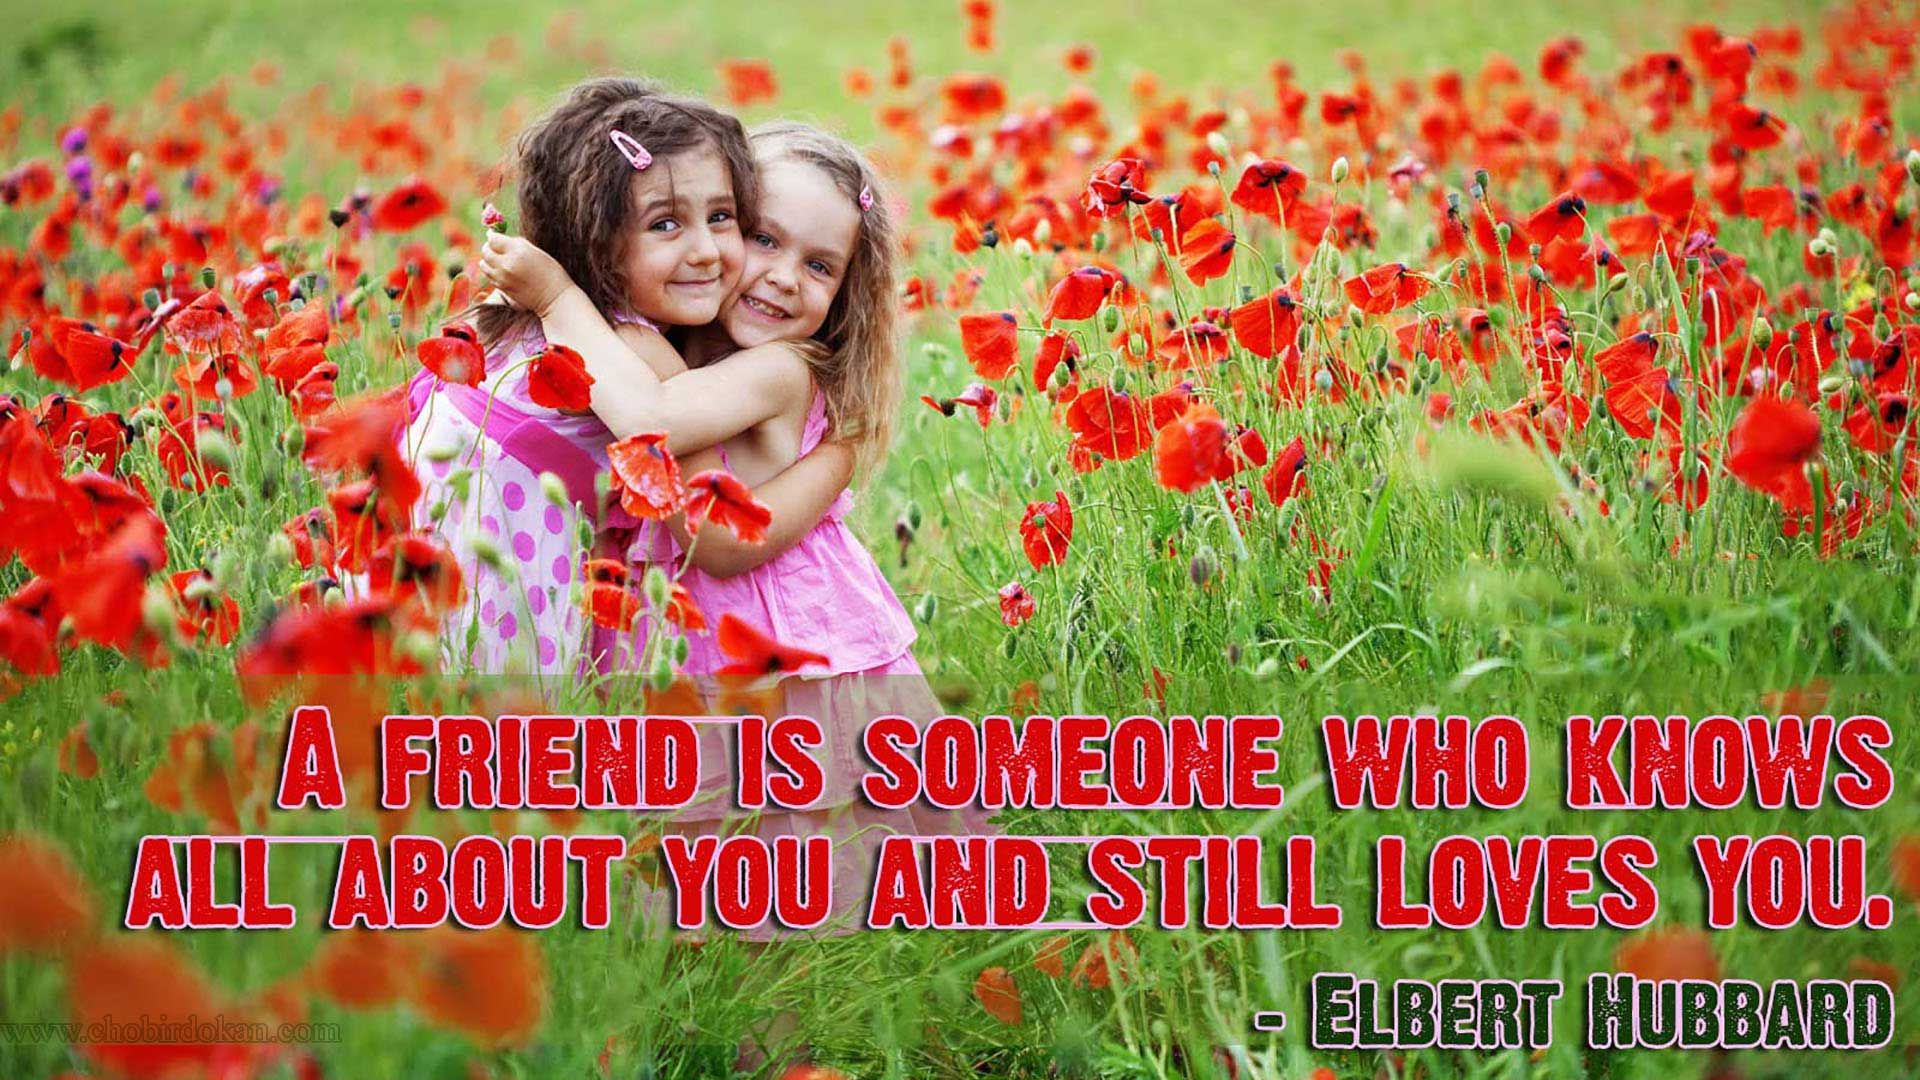 Free download 40 Cute Friendship Quotes With Images Friendship